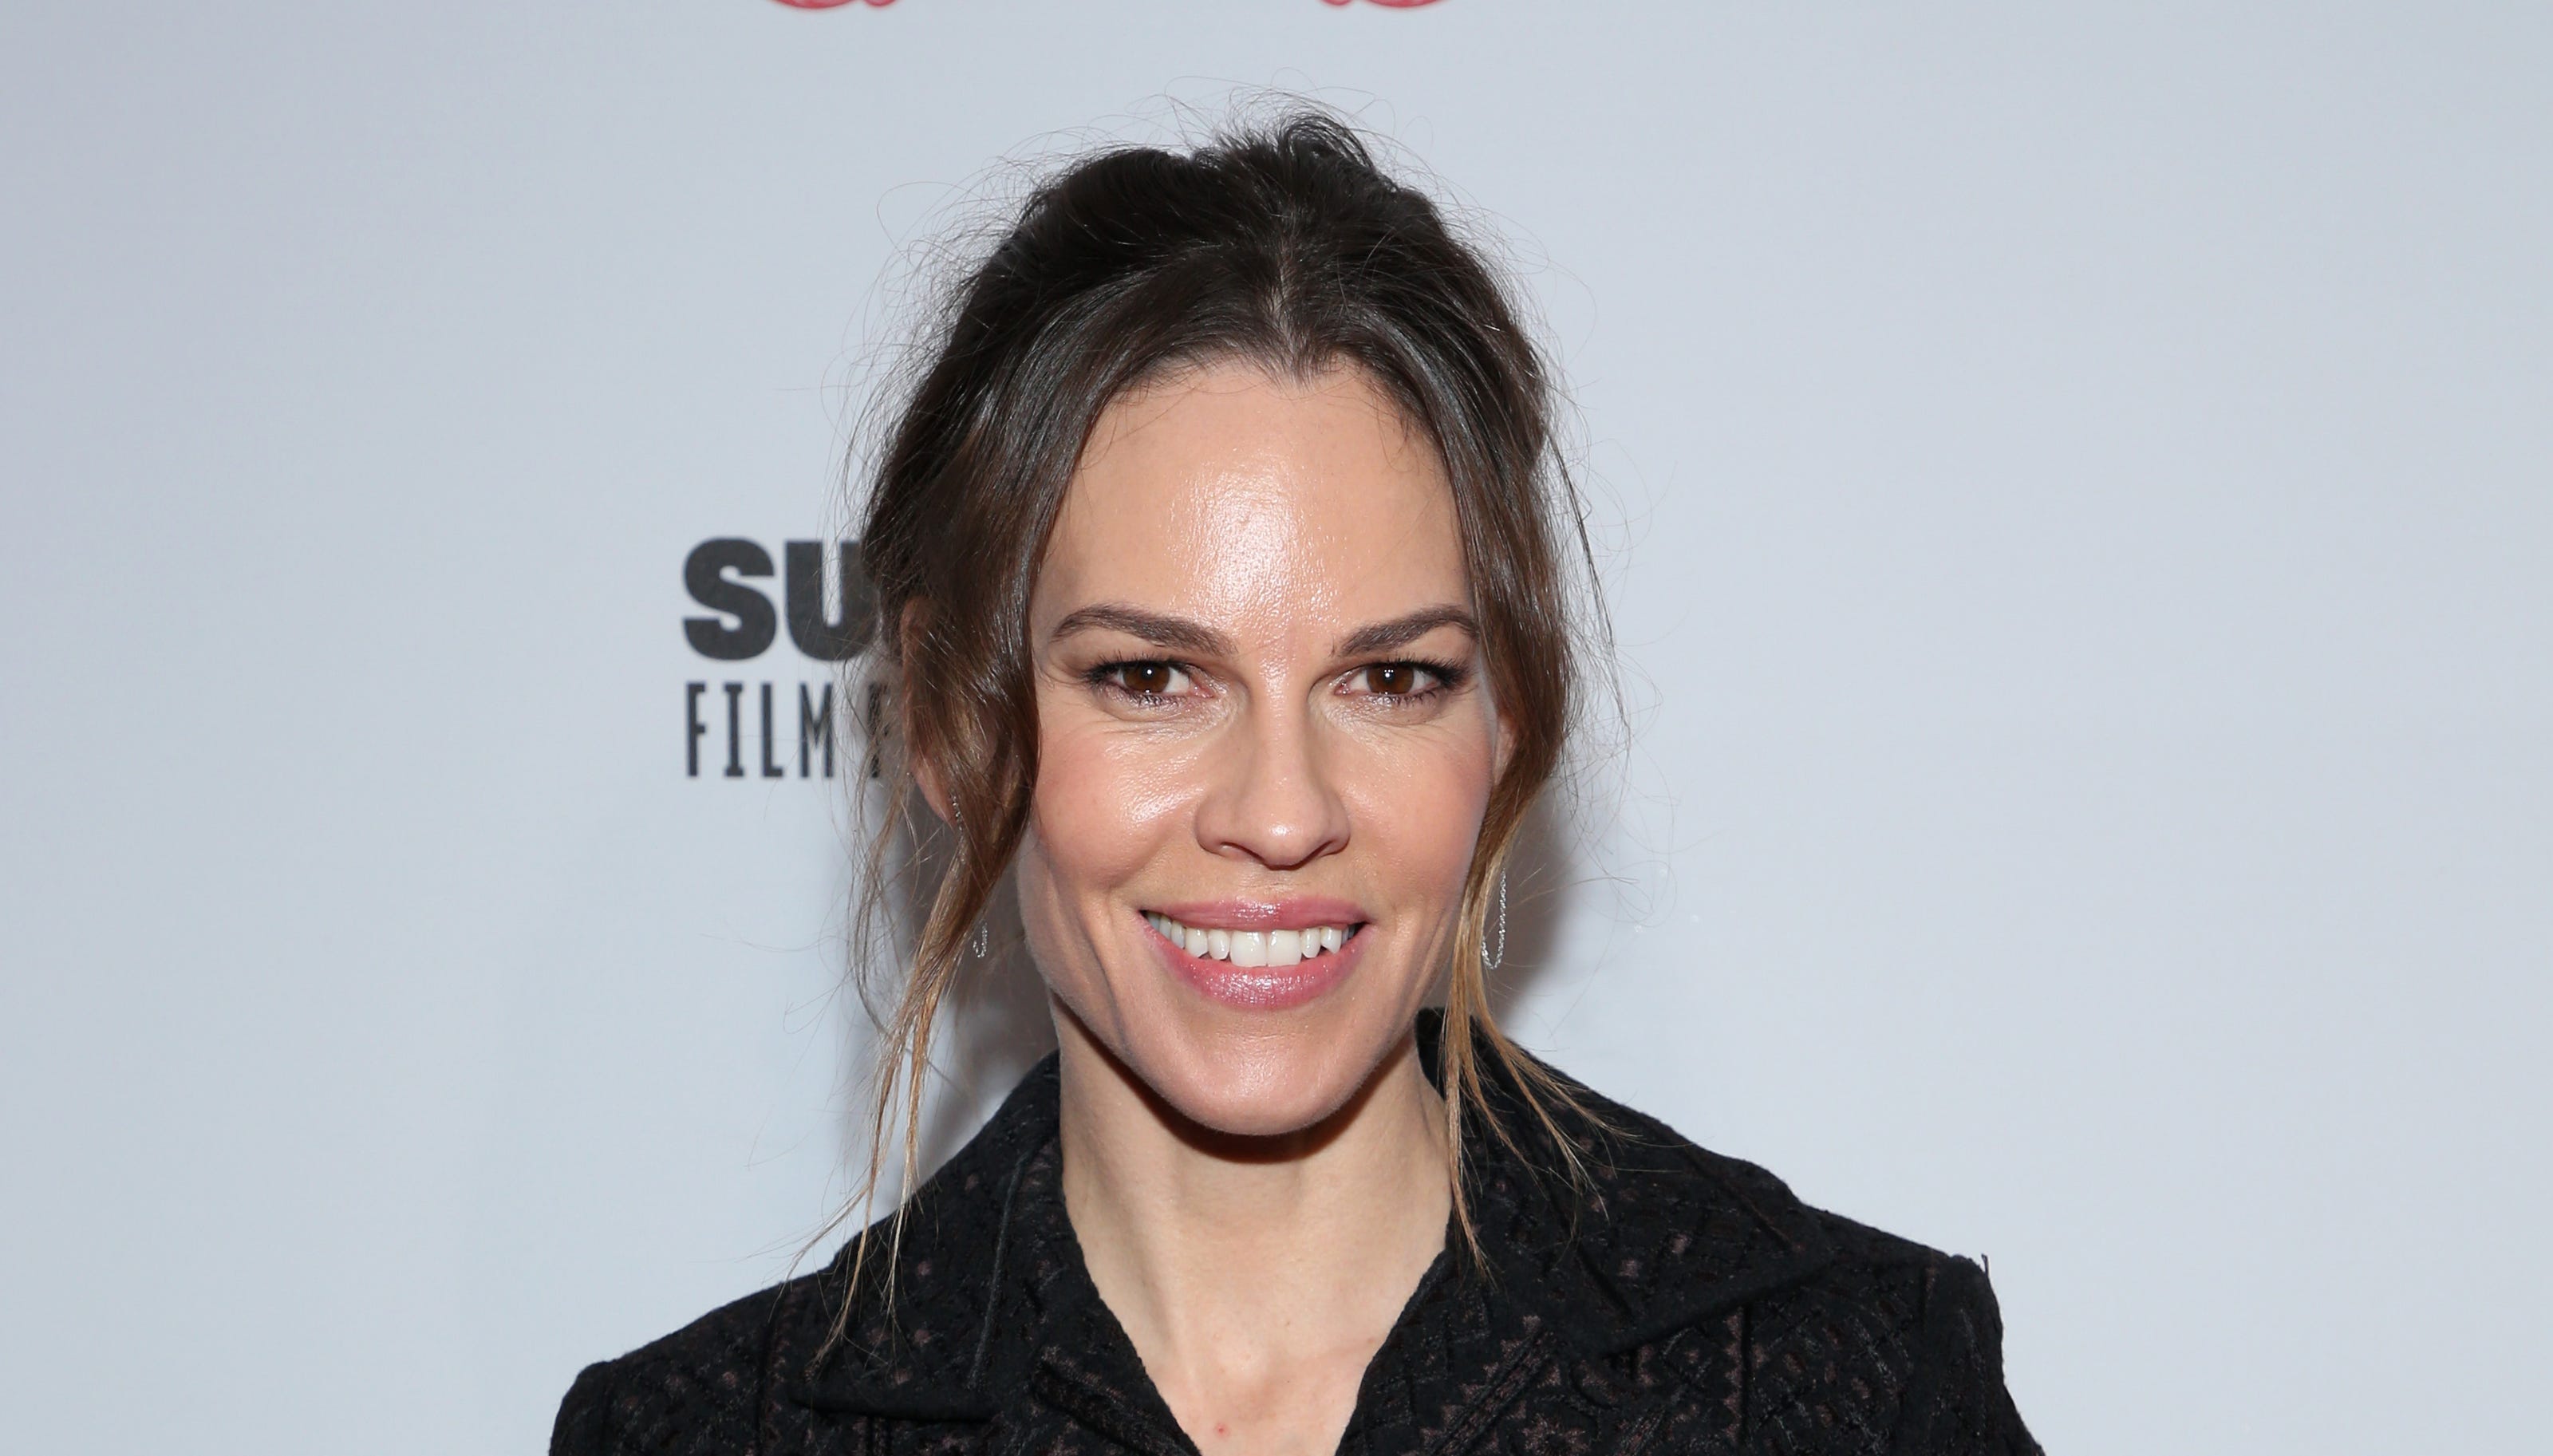 Hilary Swank Sues Sag Aftra Health Plan Over Ovarian Cyst Coverage